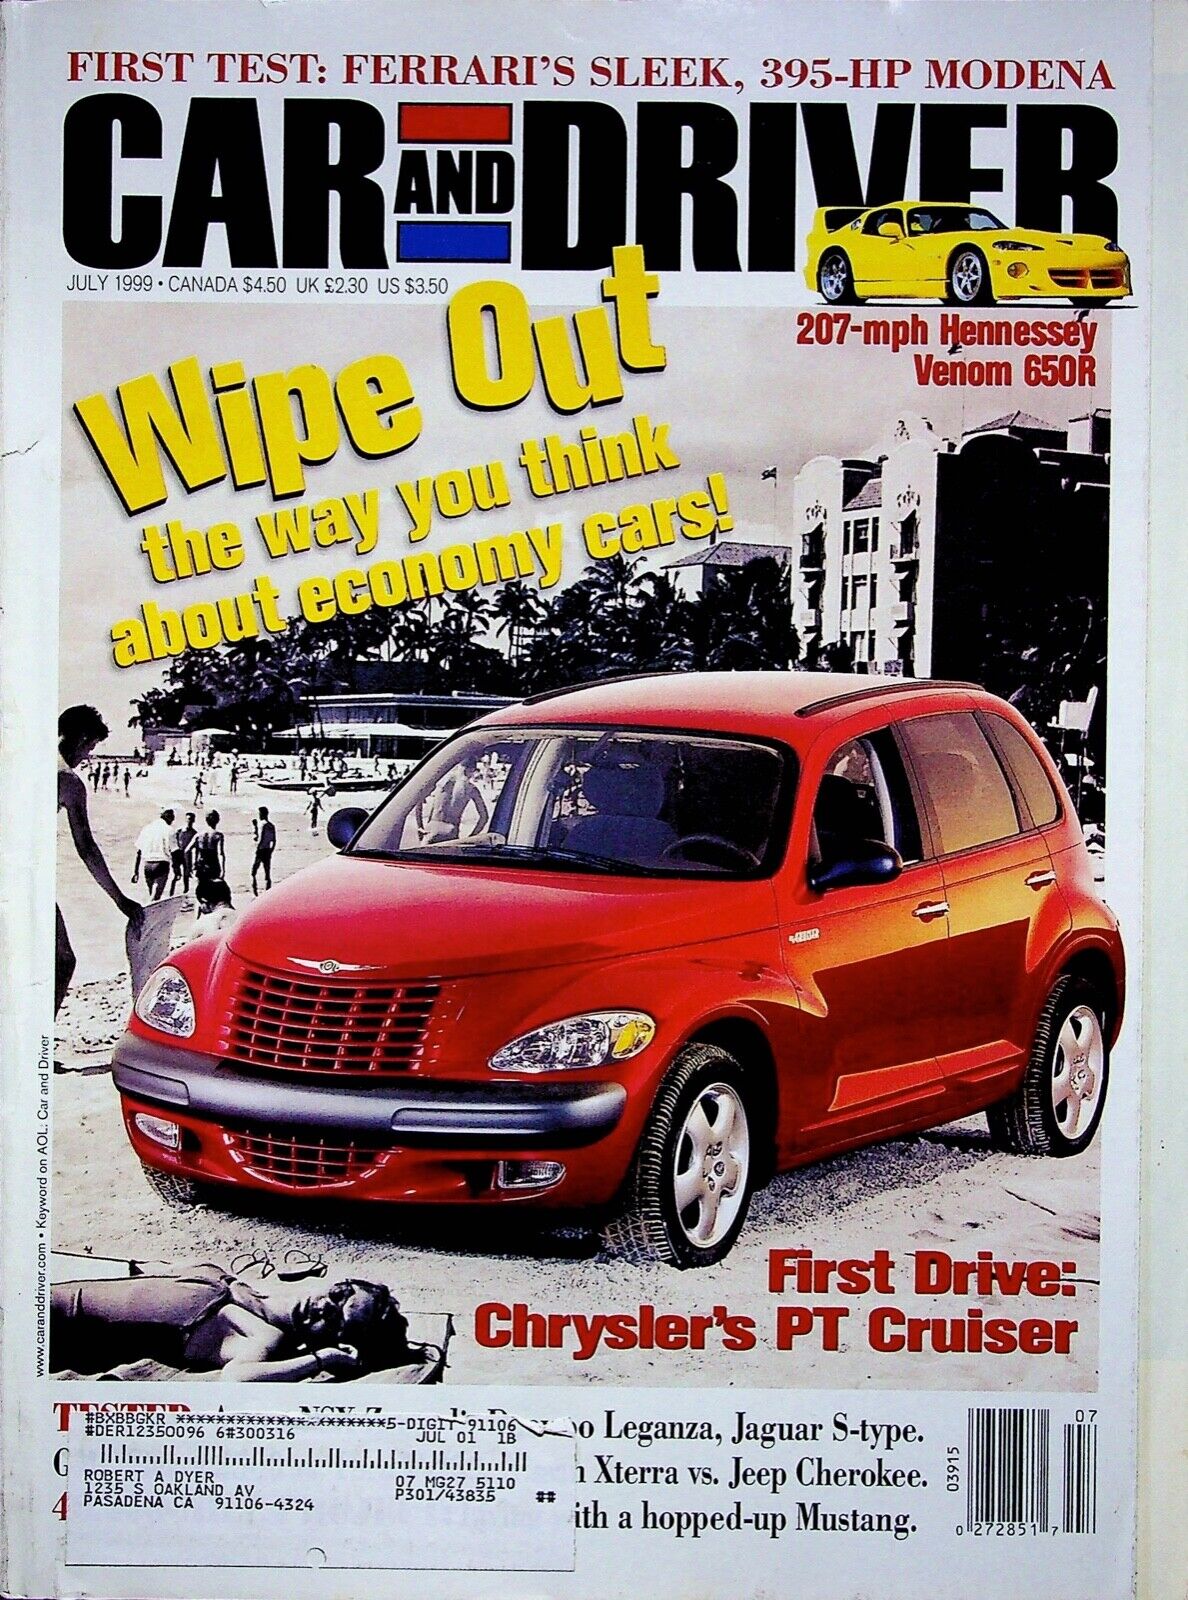 WIPE OUT - CAR AND DRIVER MAGAZINE, JULY 1999 CANADA $4.50 UK £2.30 US $3.50